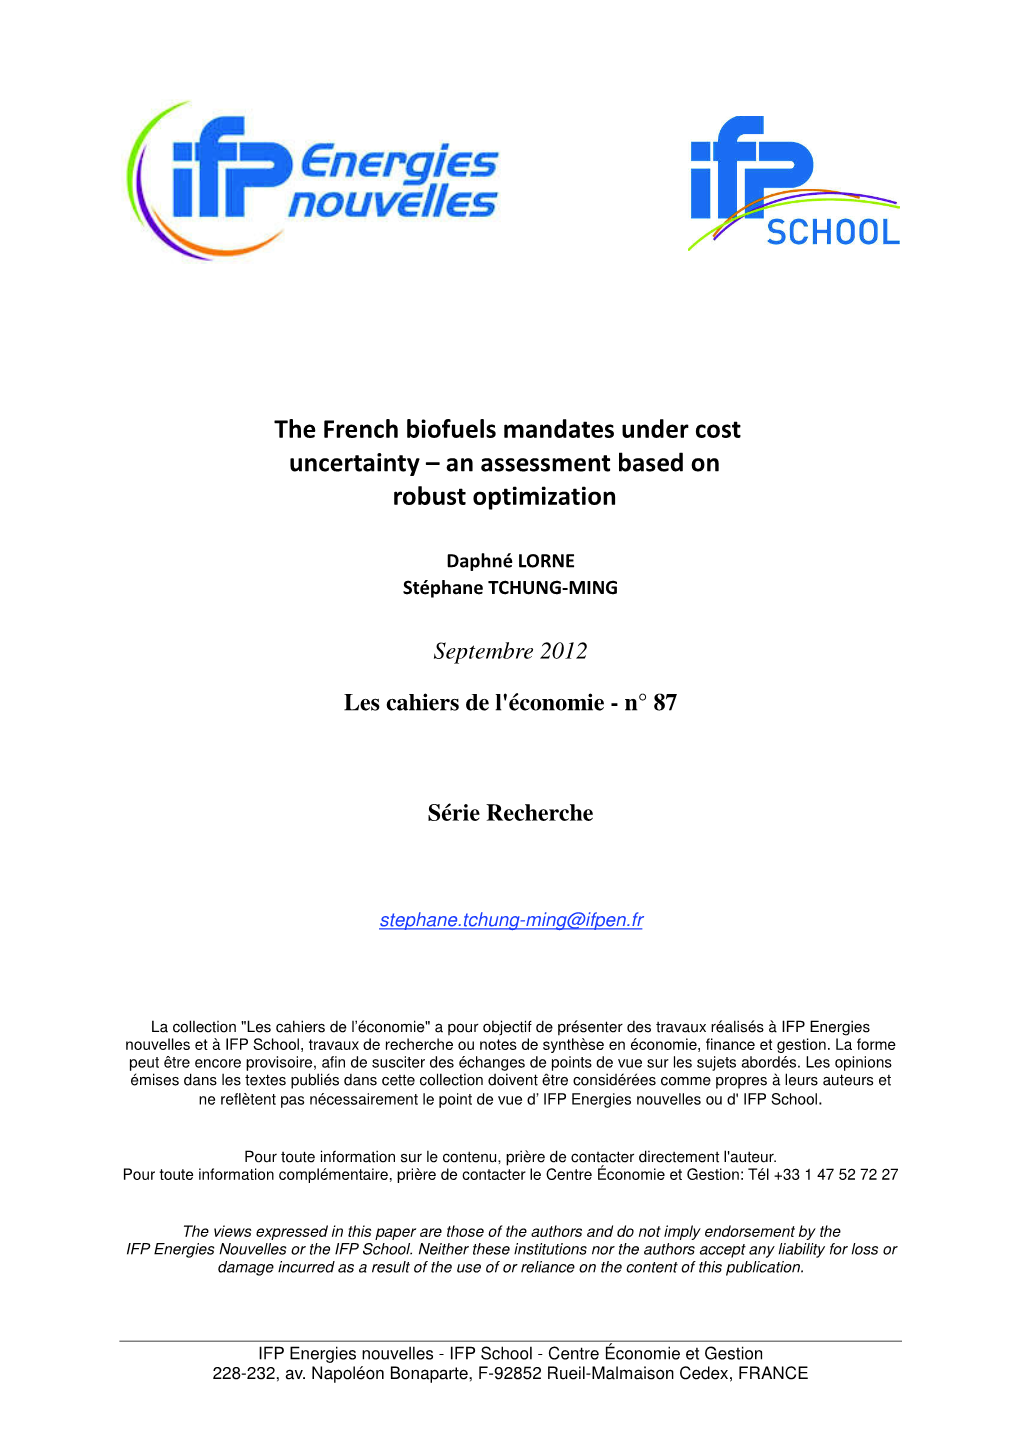 The French Biofuels Mandates Under Cost Uncertainty – an Assessment ڏ Based on Robust Optimization